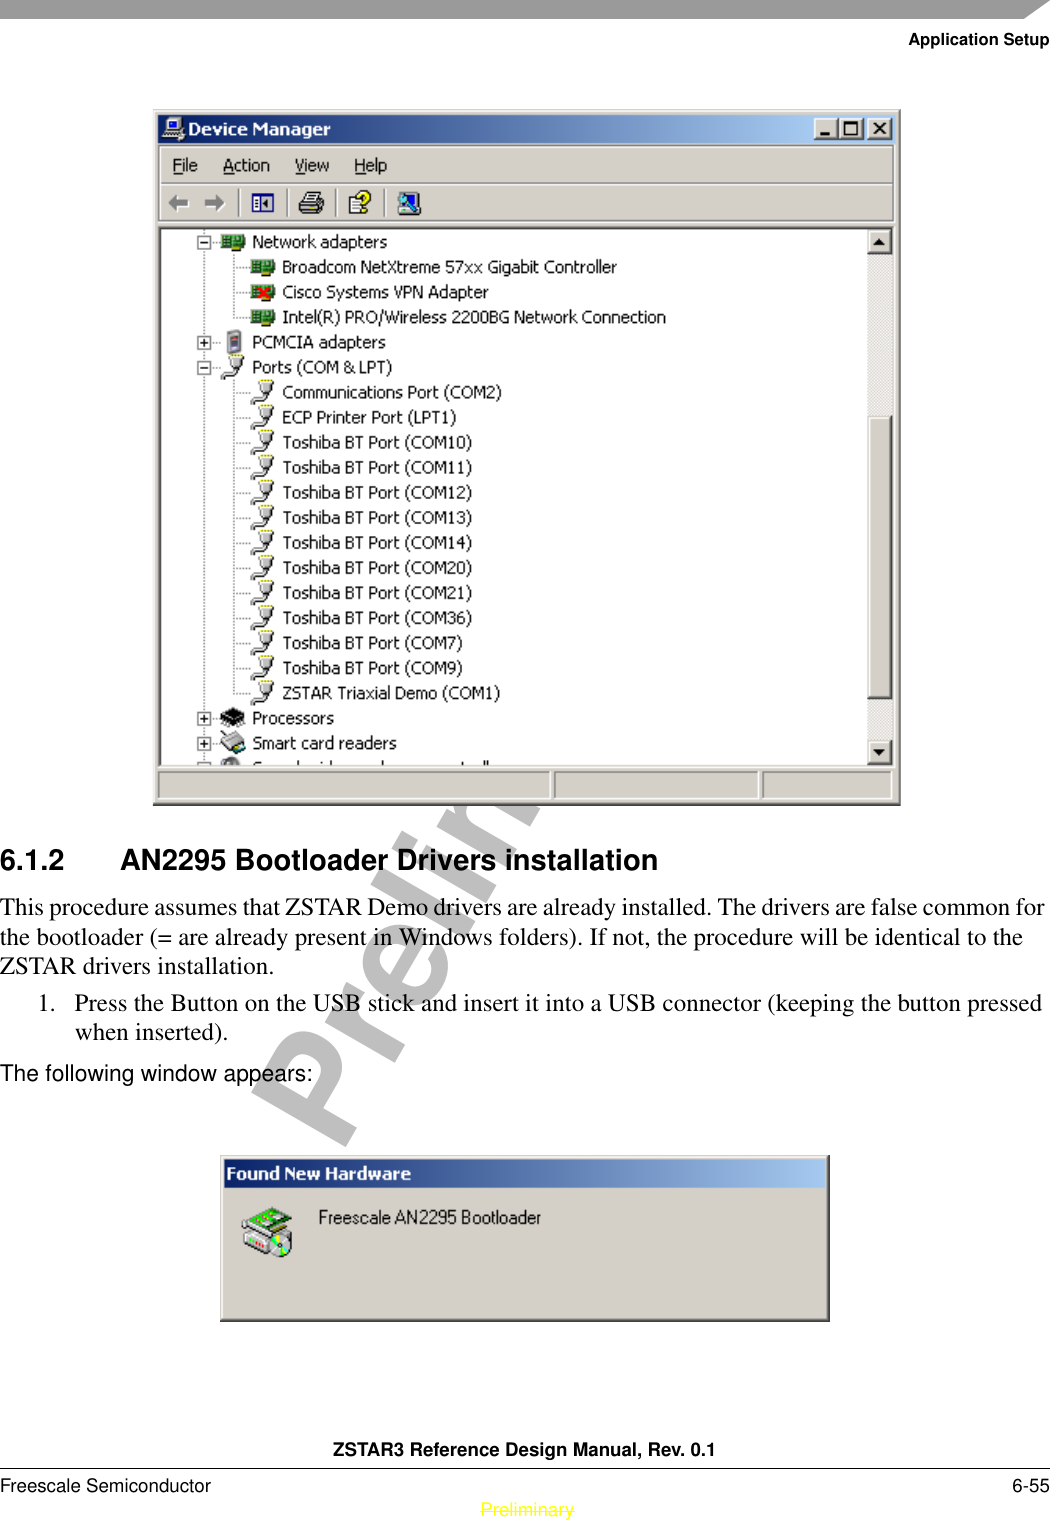 Application SetupZSTAR3 Reference Design Manual, Rev. 0.1Freescale Semiconductor 6-55 PreliminaryPreliminary6.1.2 AN2295 Bootloader Drivers installationThis procedure assumes that ZSTAR Demo drivers are already installed. The drivers are false common for the bootloader (= are already present in Windows folders). If not, the procedure will be identical to the ZSTAR drivers installation.1. Press the Button on the USB stick and insert it into a USB connector (keeping the button pressed when inserted).The following window appears: